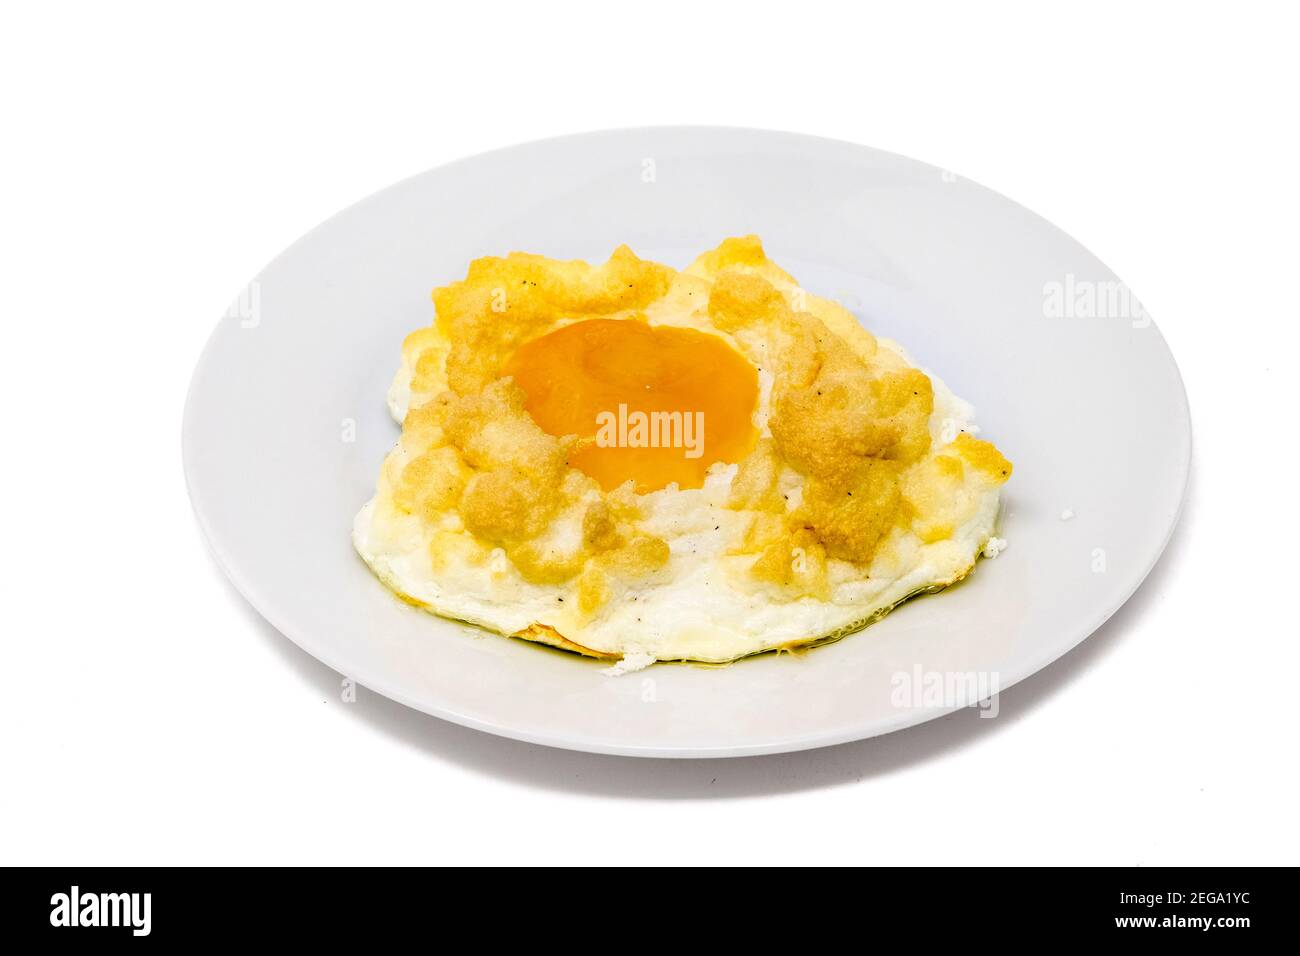 Cloud eggs on a plate with white background Stock Photo